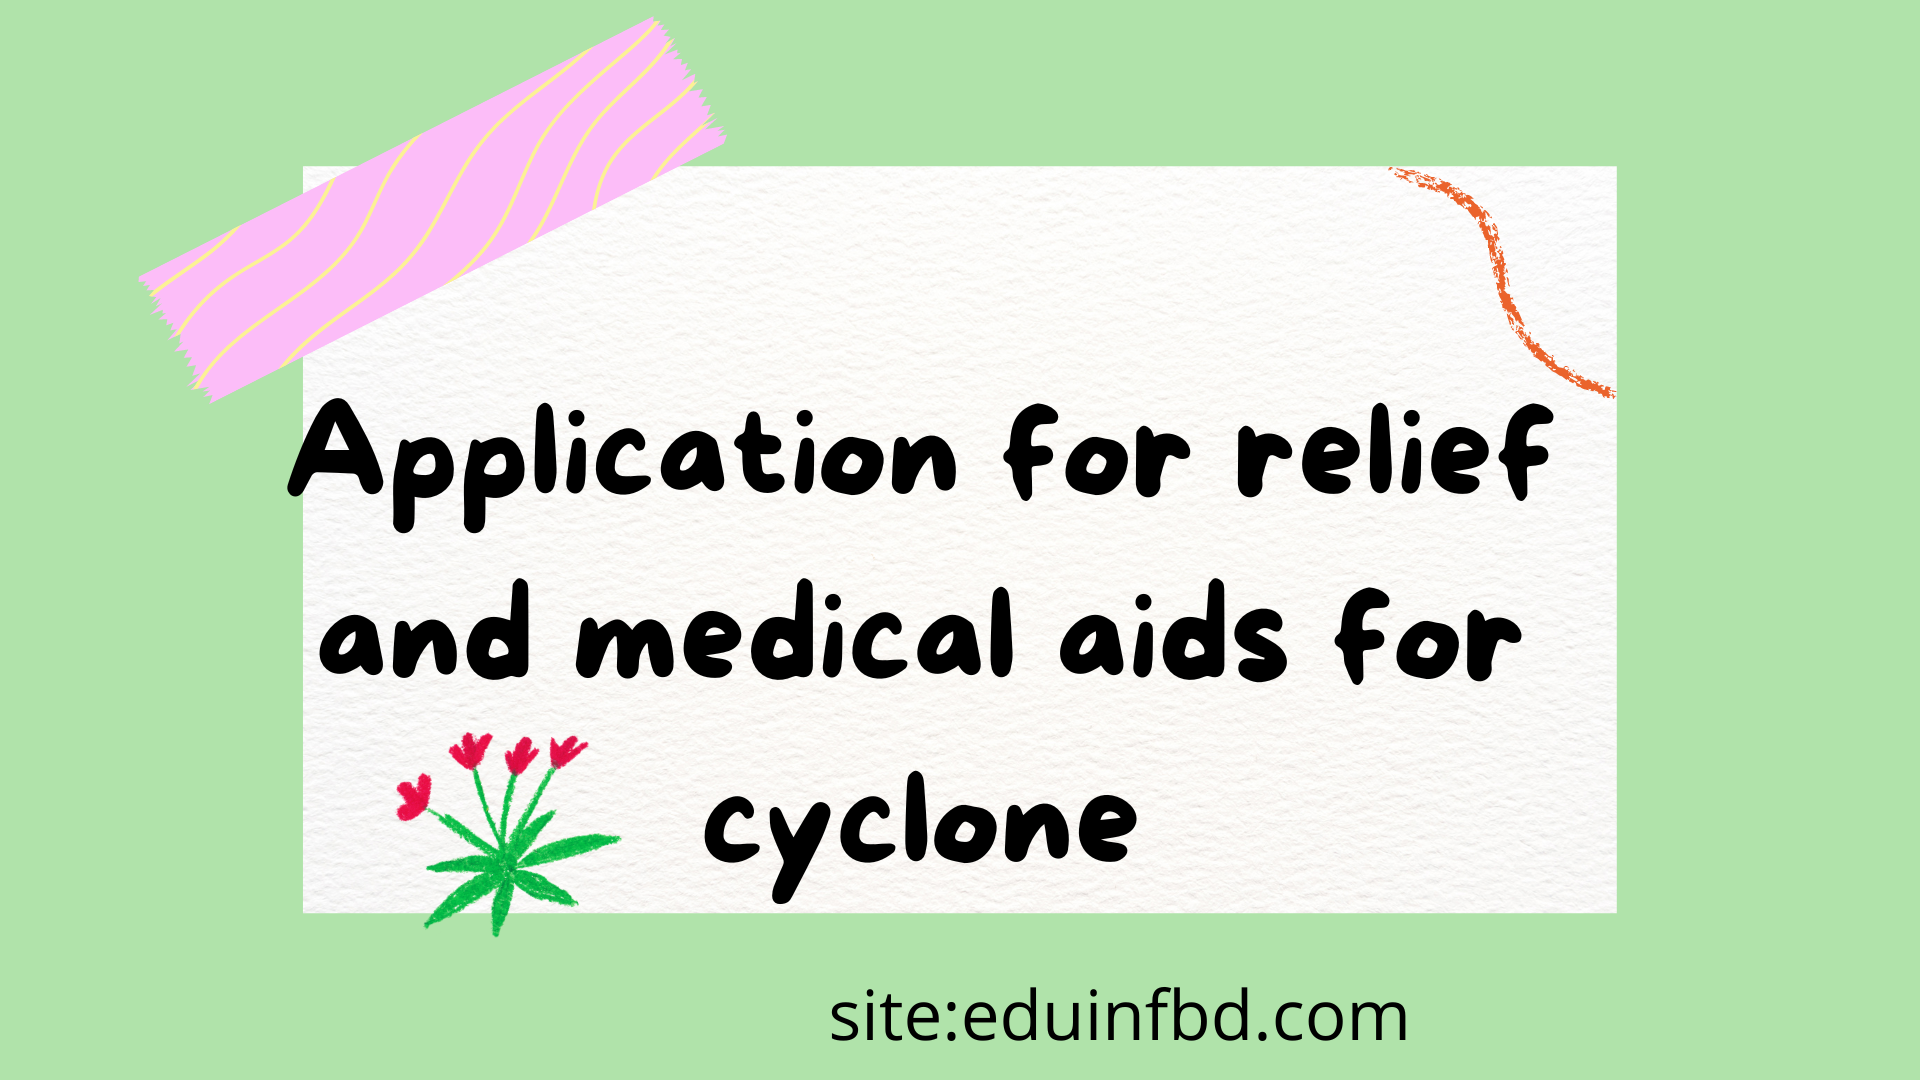 Application for relief and medical aids for cyclone